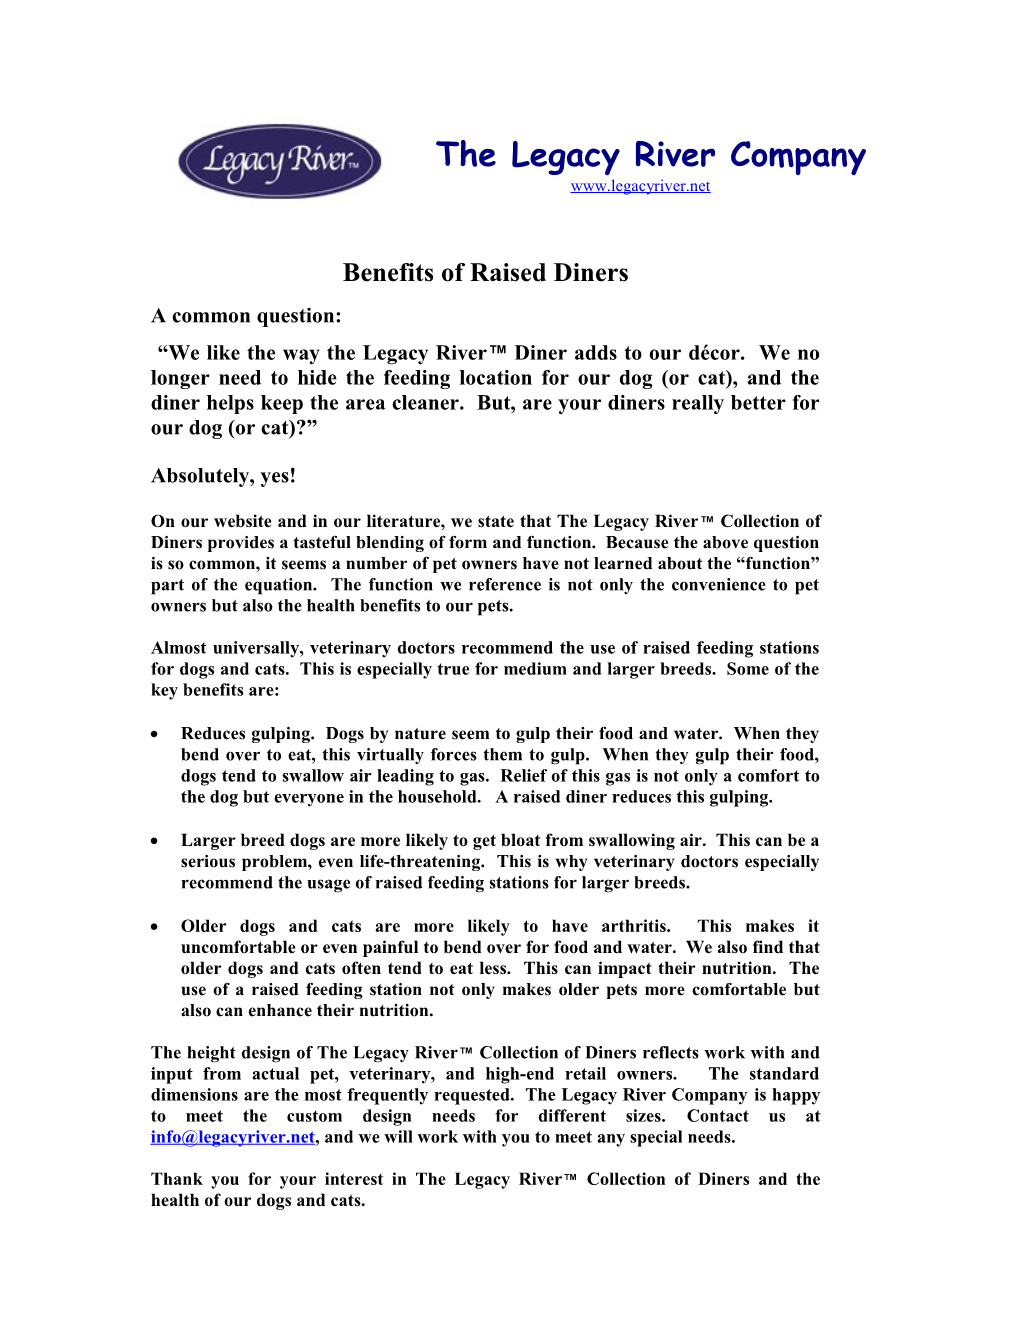 The Legacy River Company